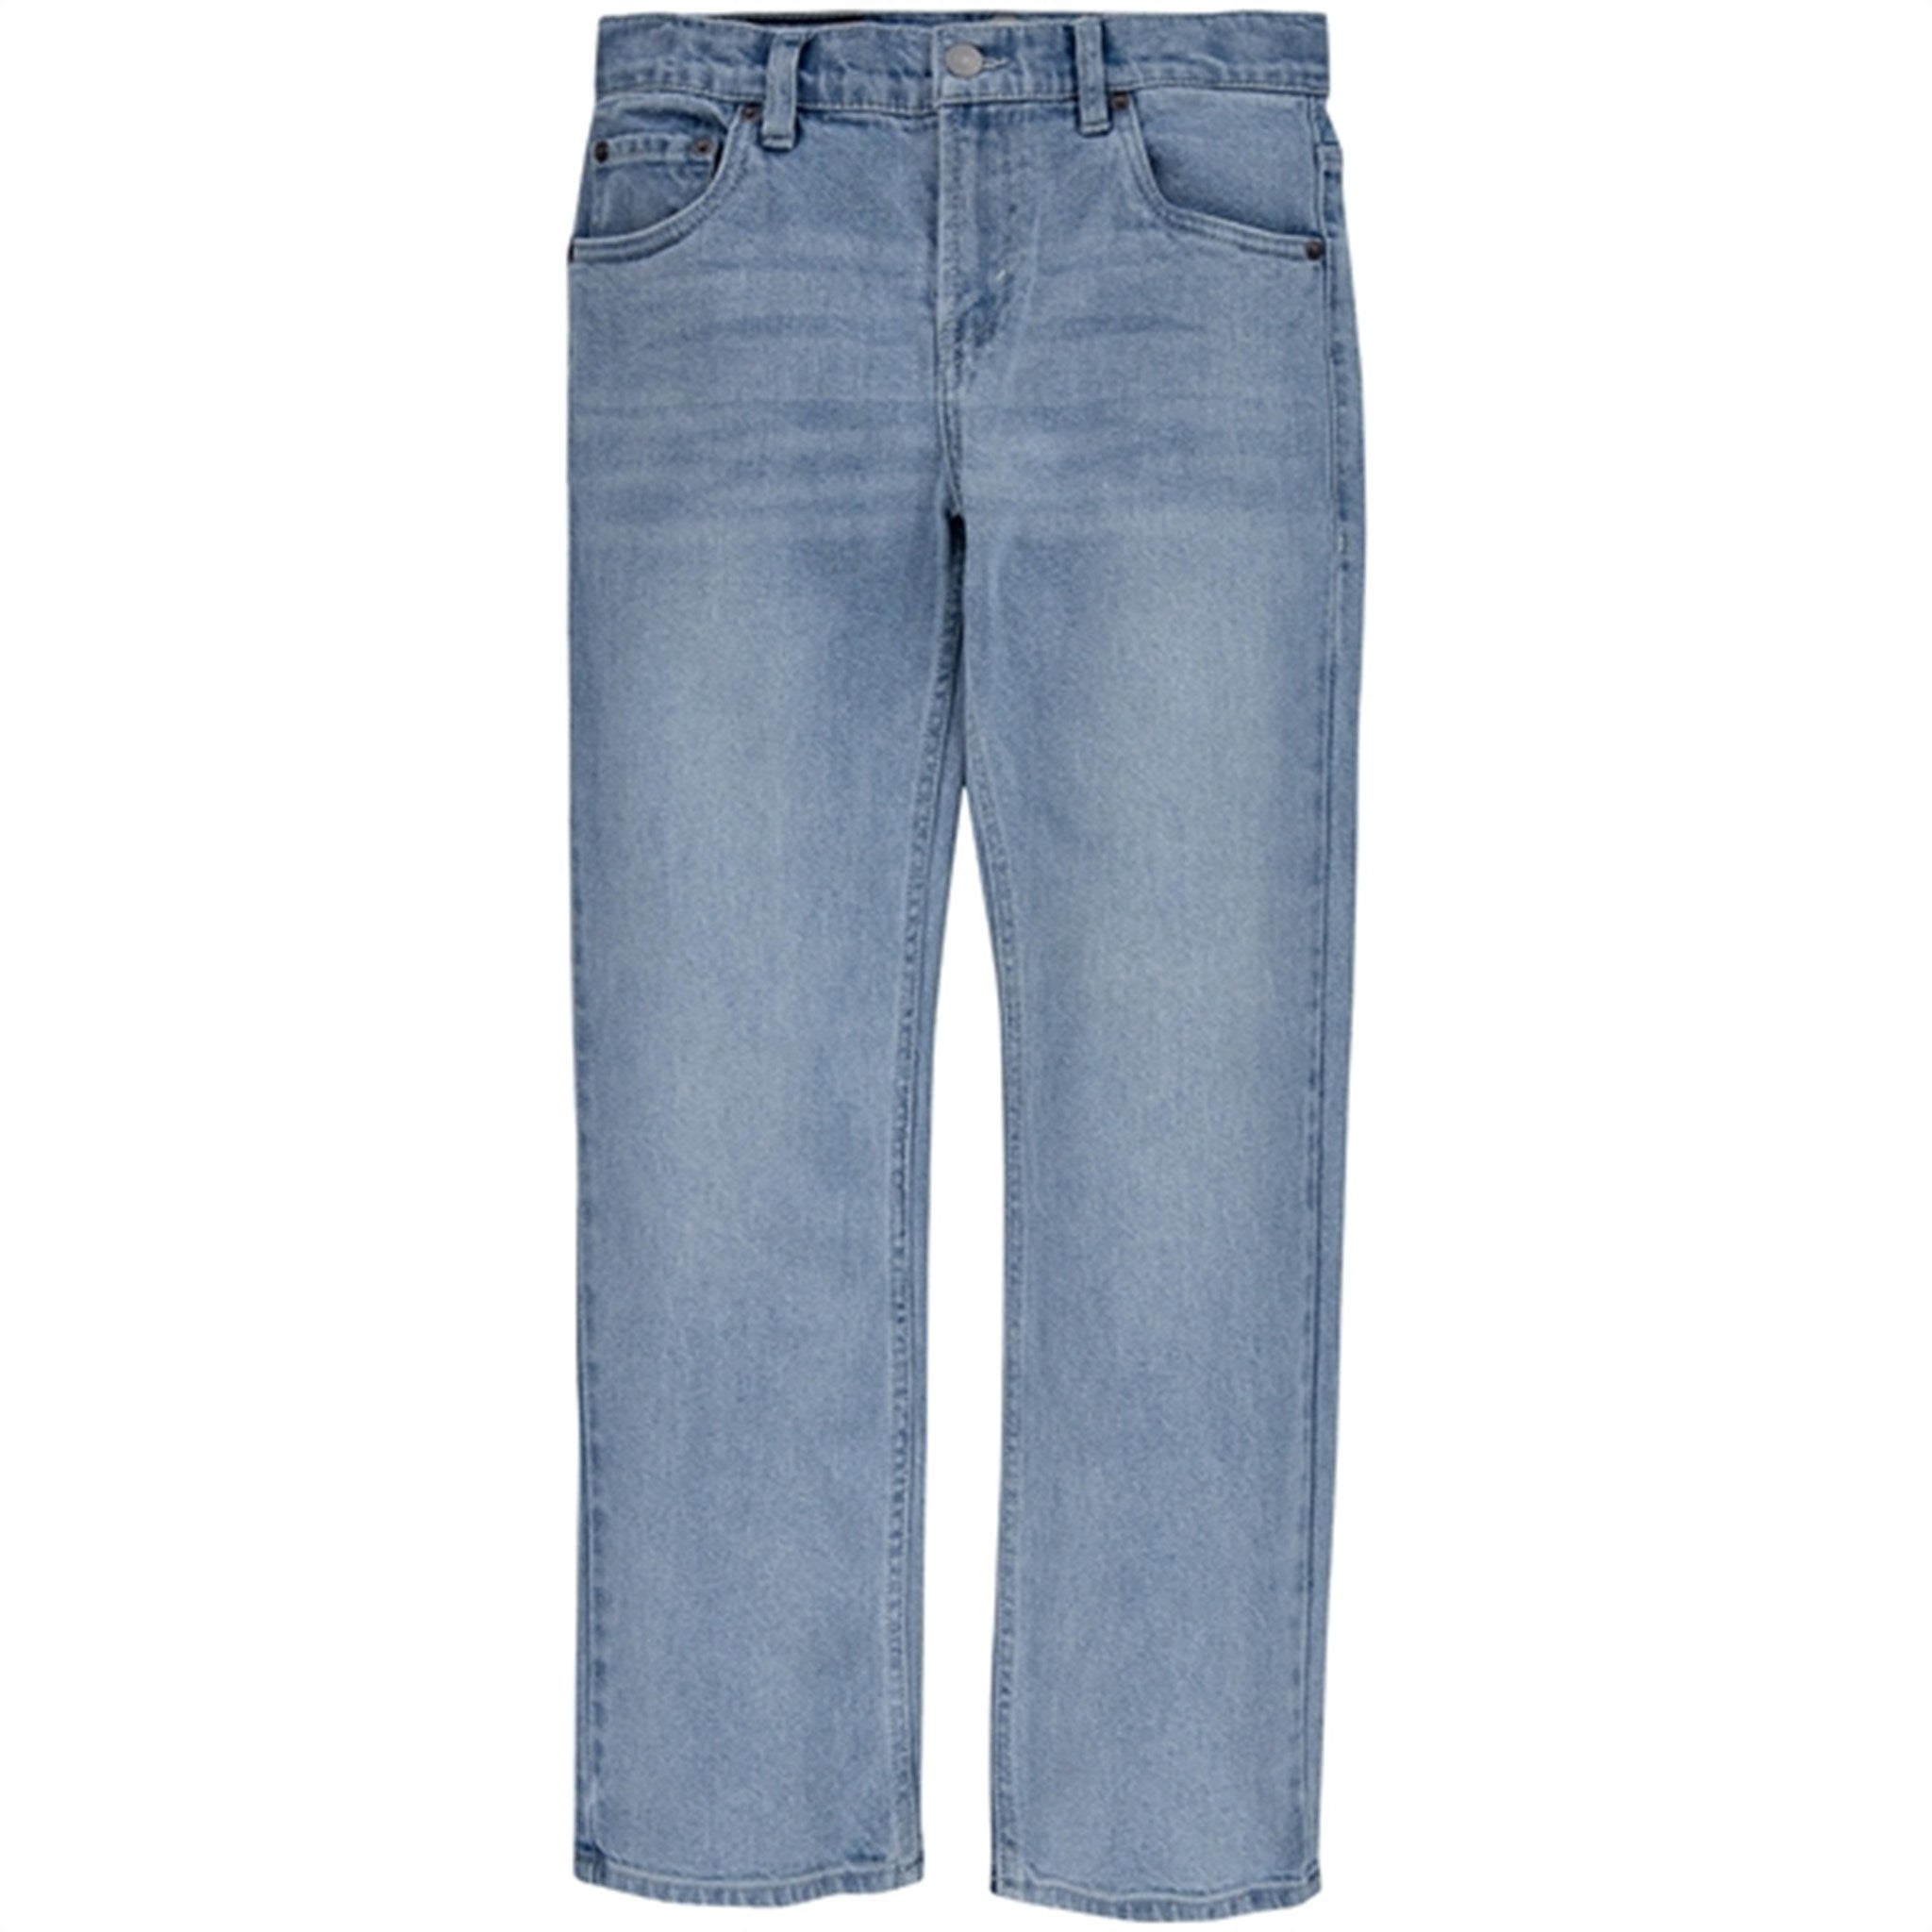 Levi's 551Z Authentic Straight Stretch Jeans Make Me